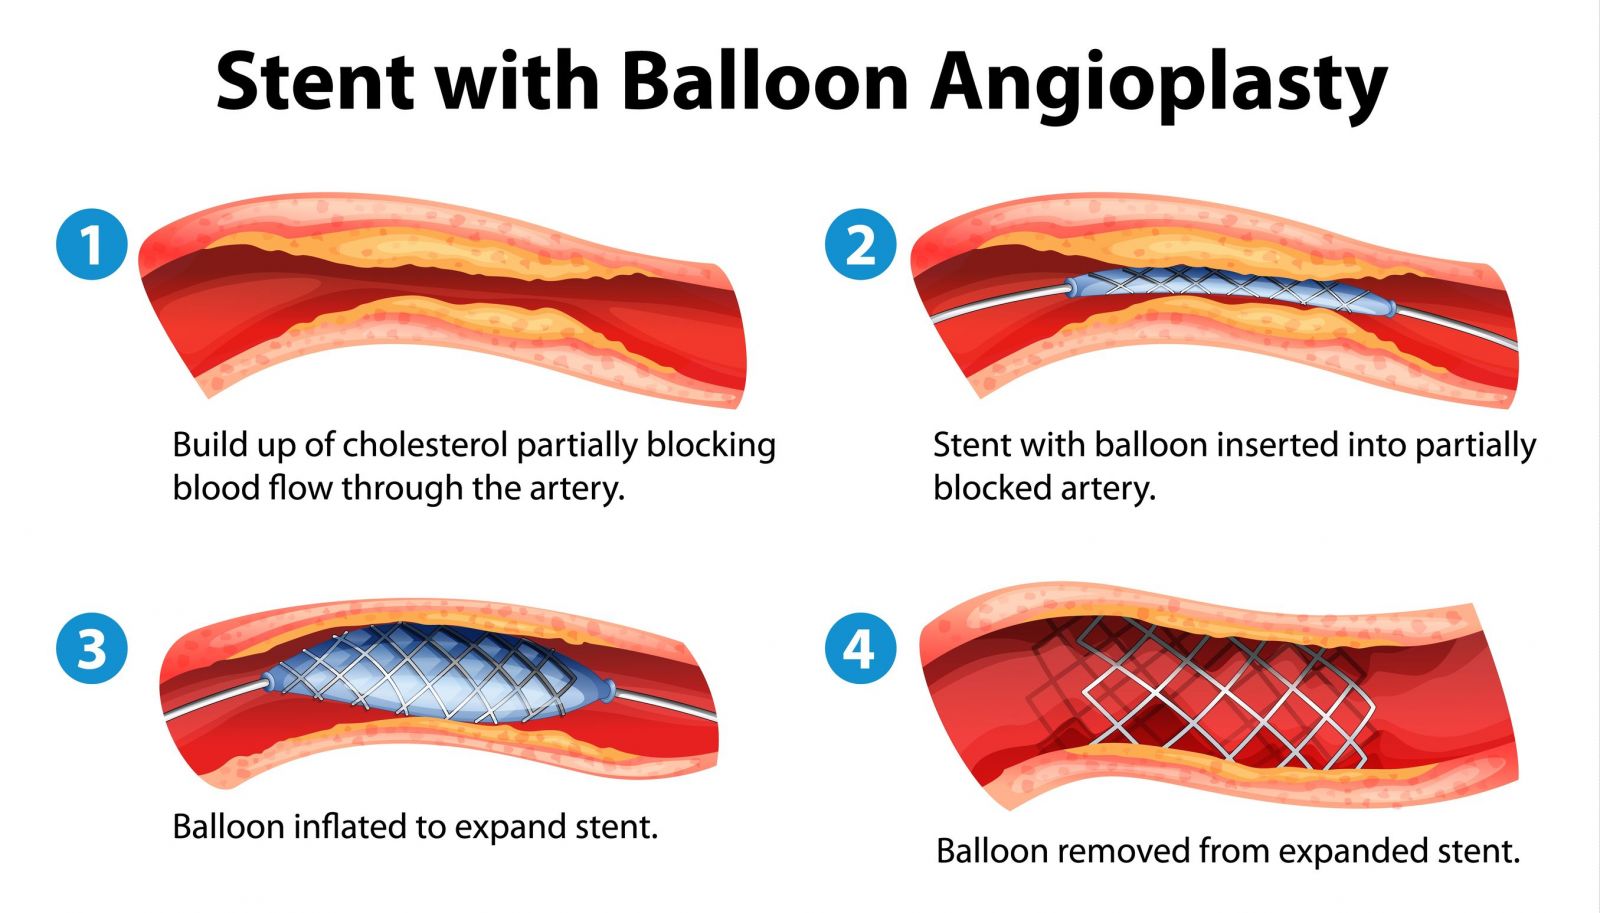 Basic steps in balloon angioplasty with stenting (source) 